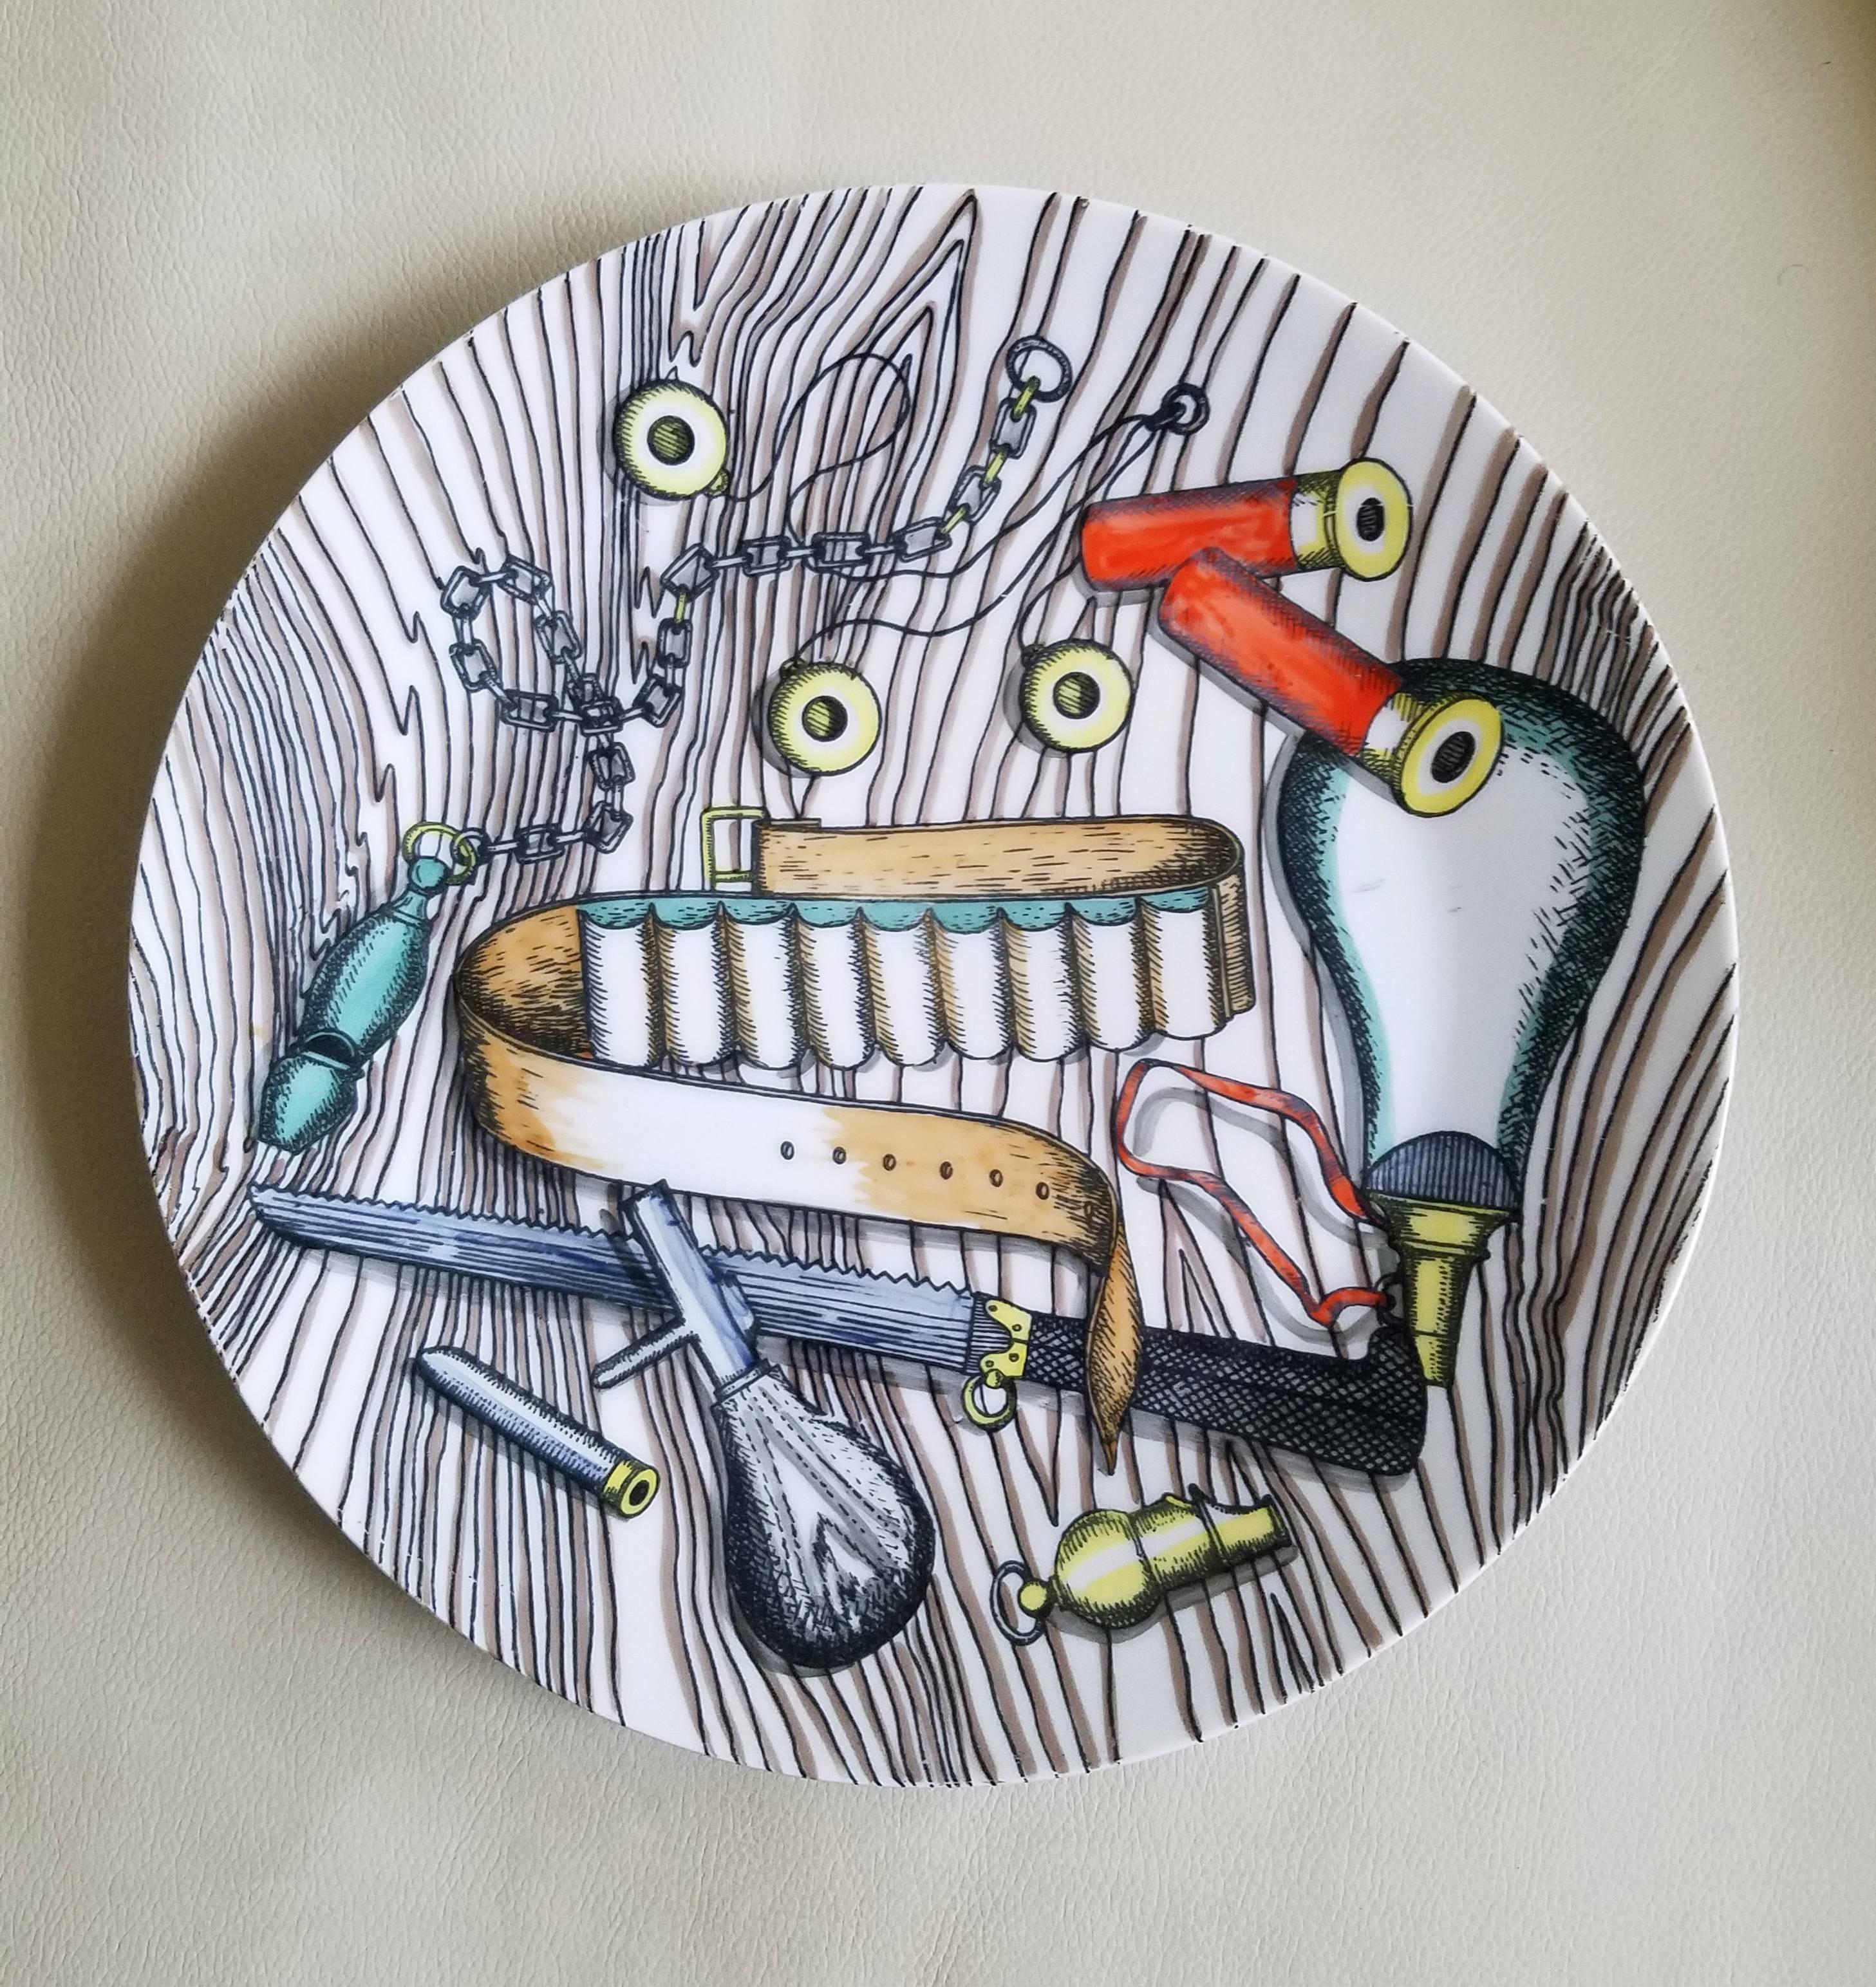 Vintage Piero Fornasetti Porcelain with Hunting Objects-Set of Six Plates 1